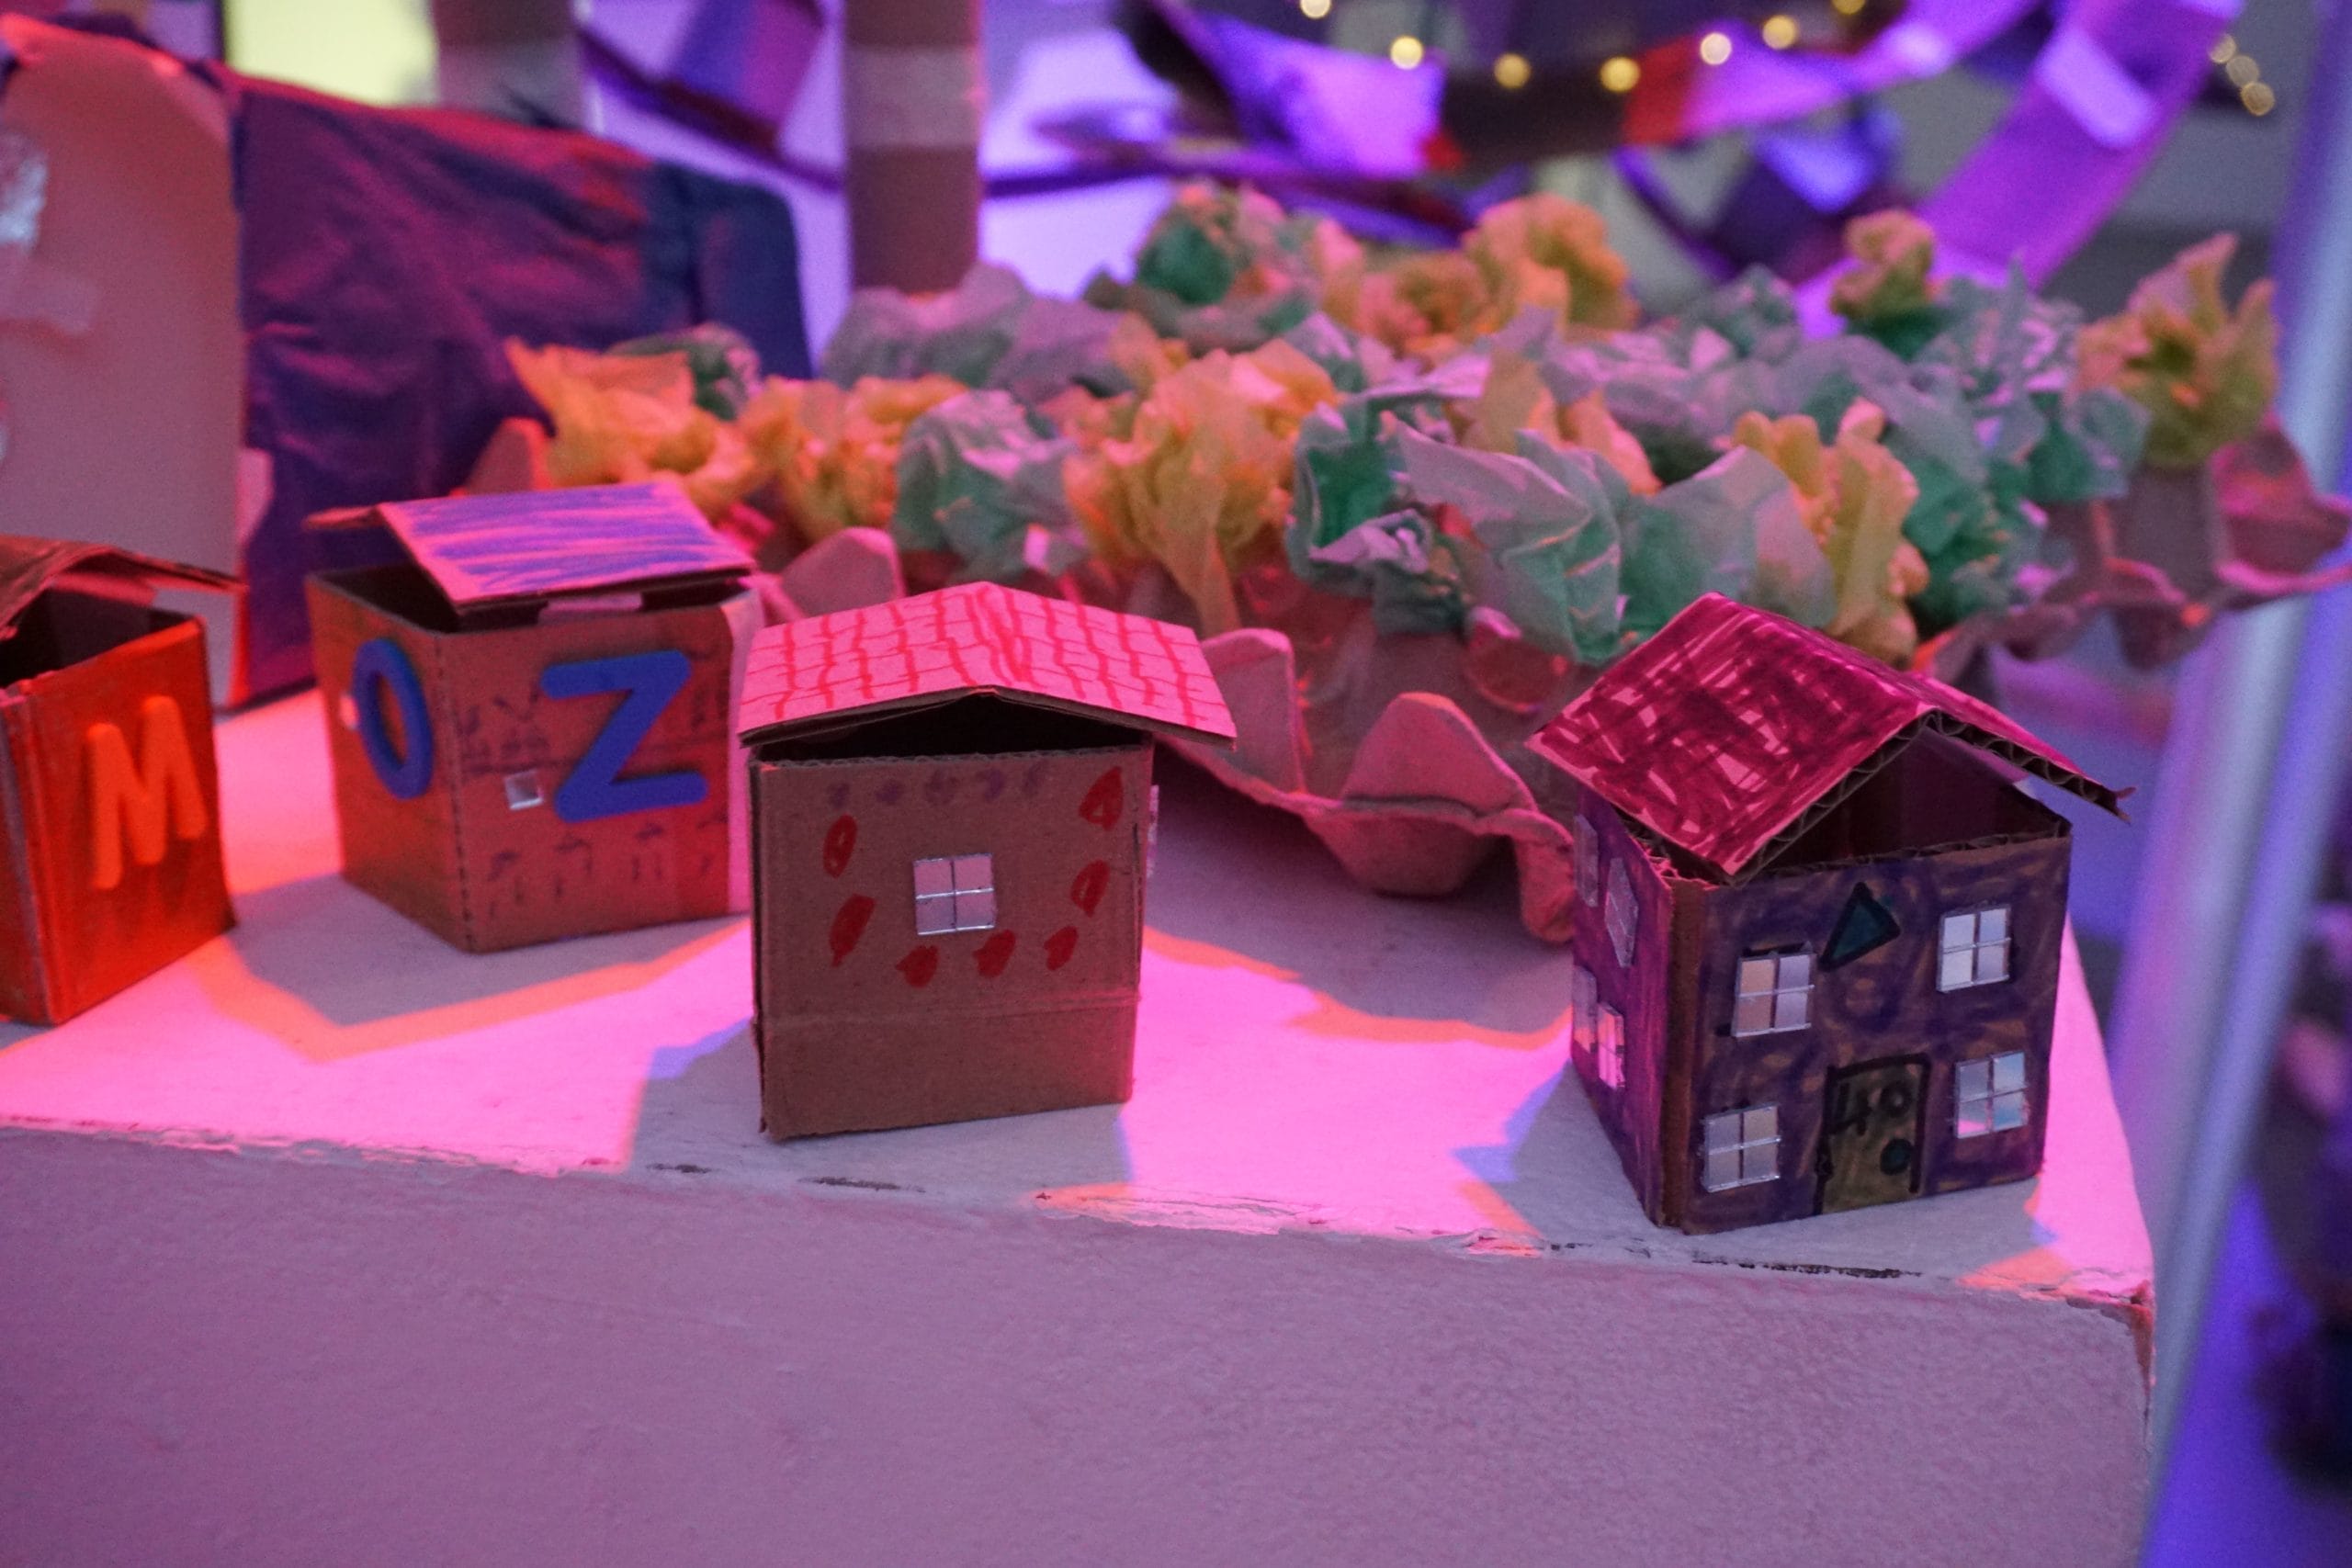 Close up shot of cardboard houses, decorated by young people in felt tip. Behind the houses, an eggbox and tissue paper has been fashioned into a green space. Fairy lights are visible in the background.